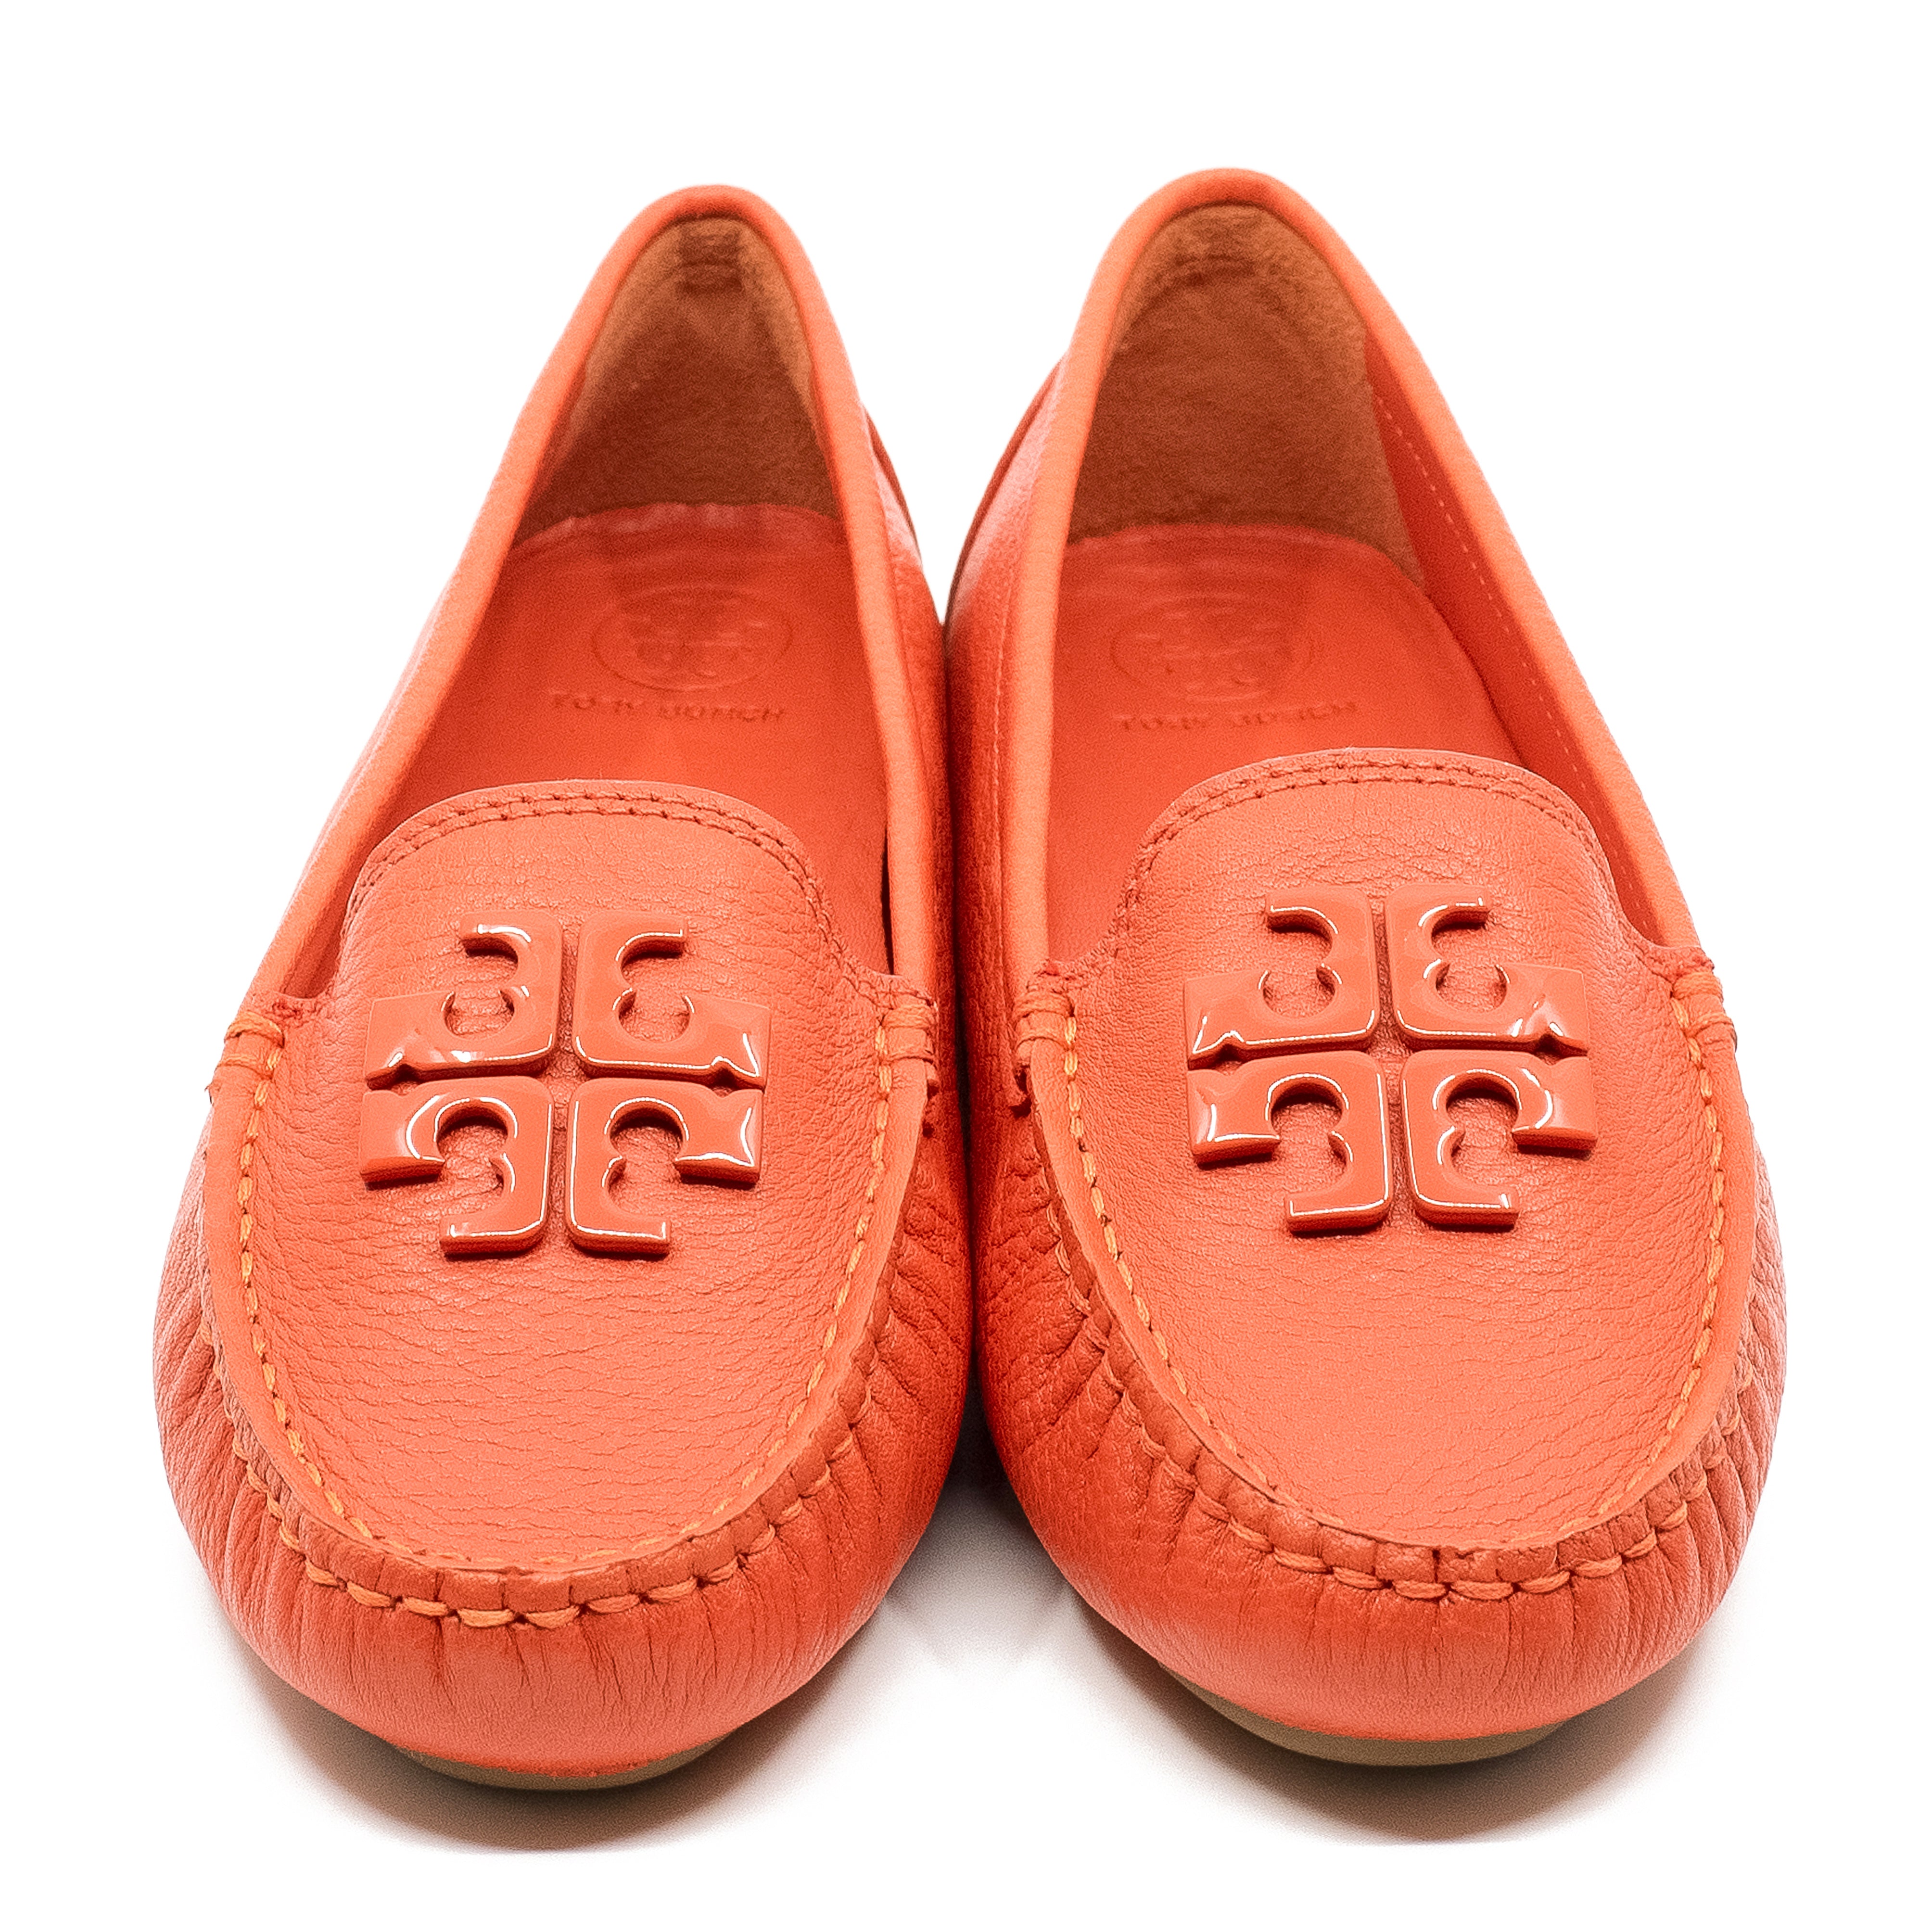 Lowell2 Moccasins in Spicy Orange